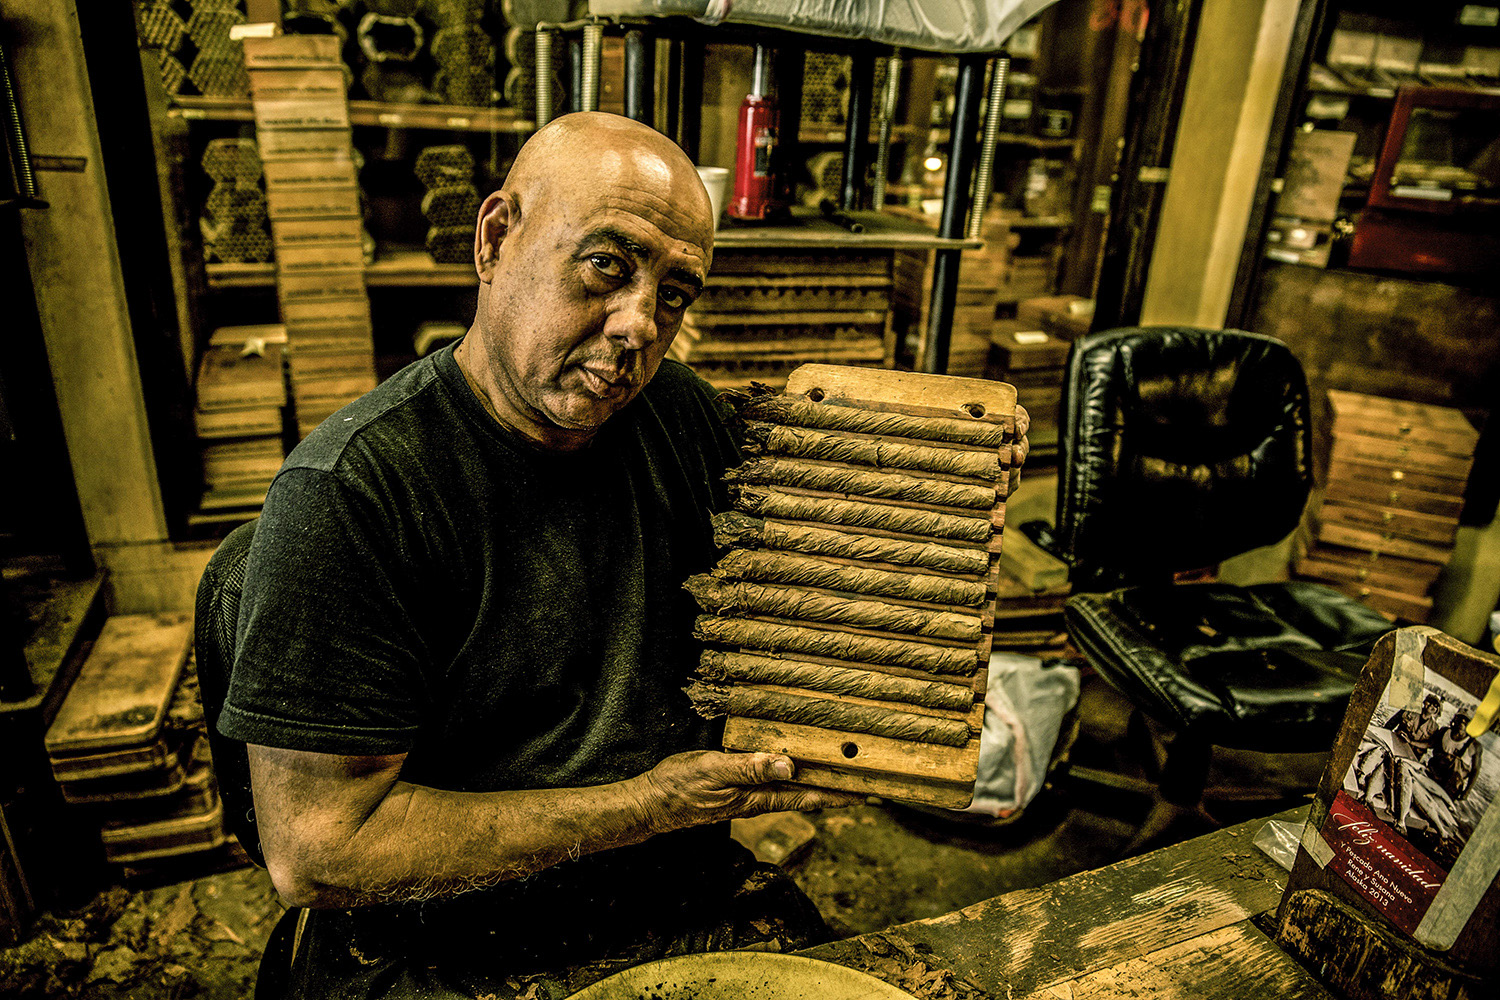 Vicki Leopold | New Orleans Cigar Factory | Personal Series